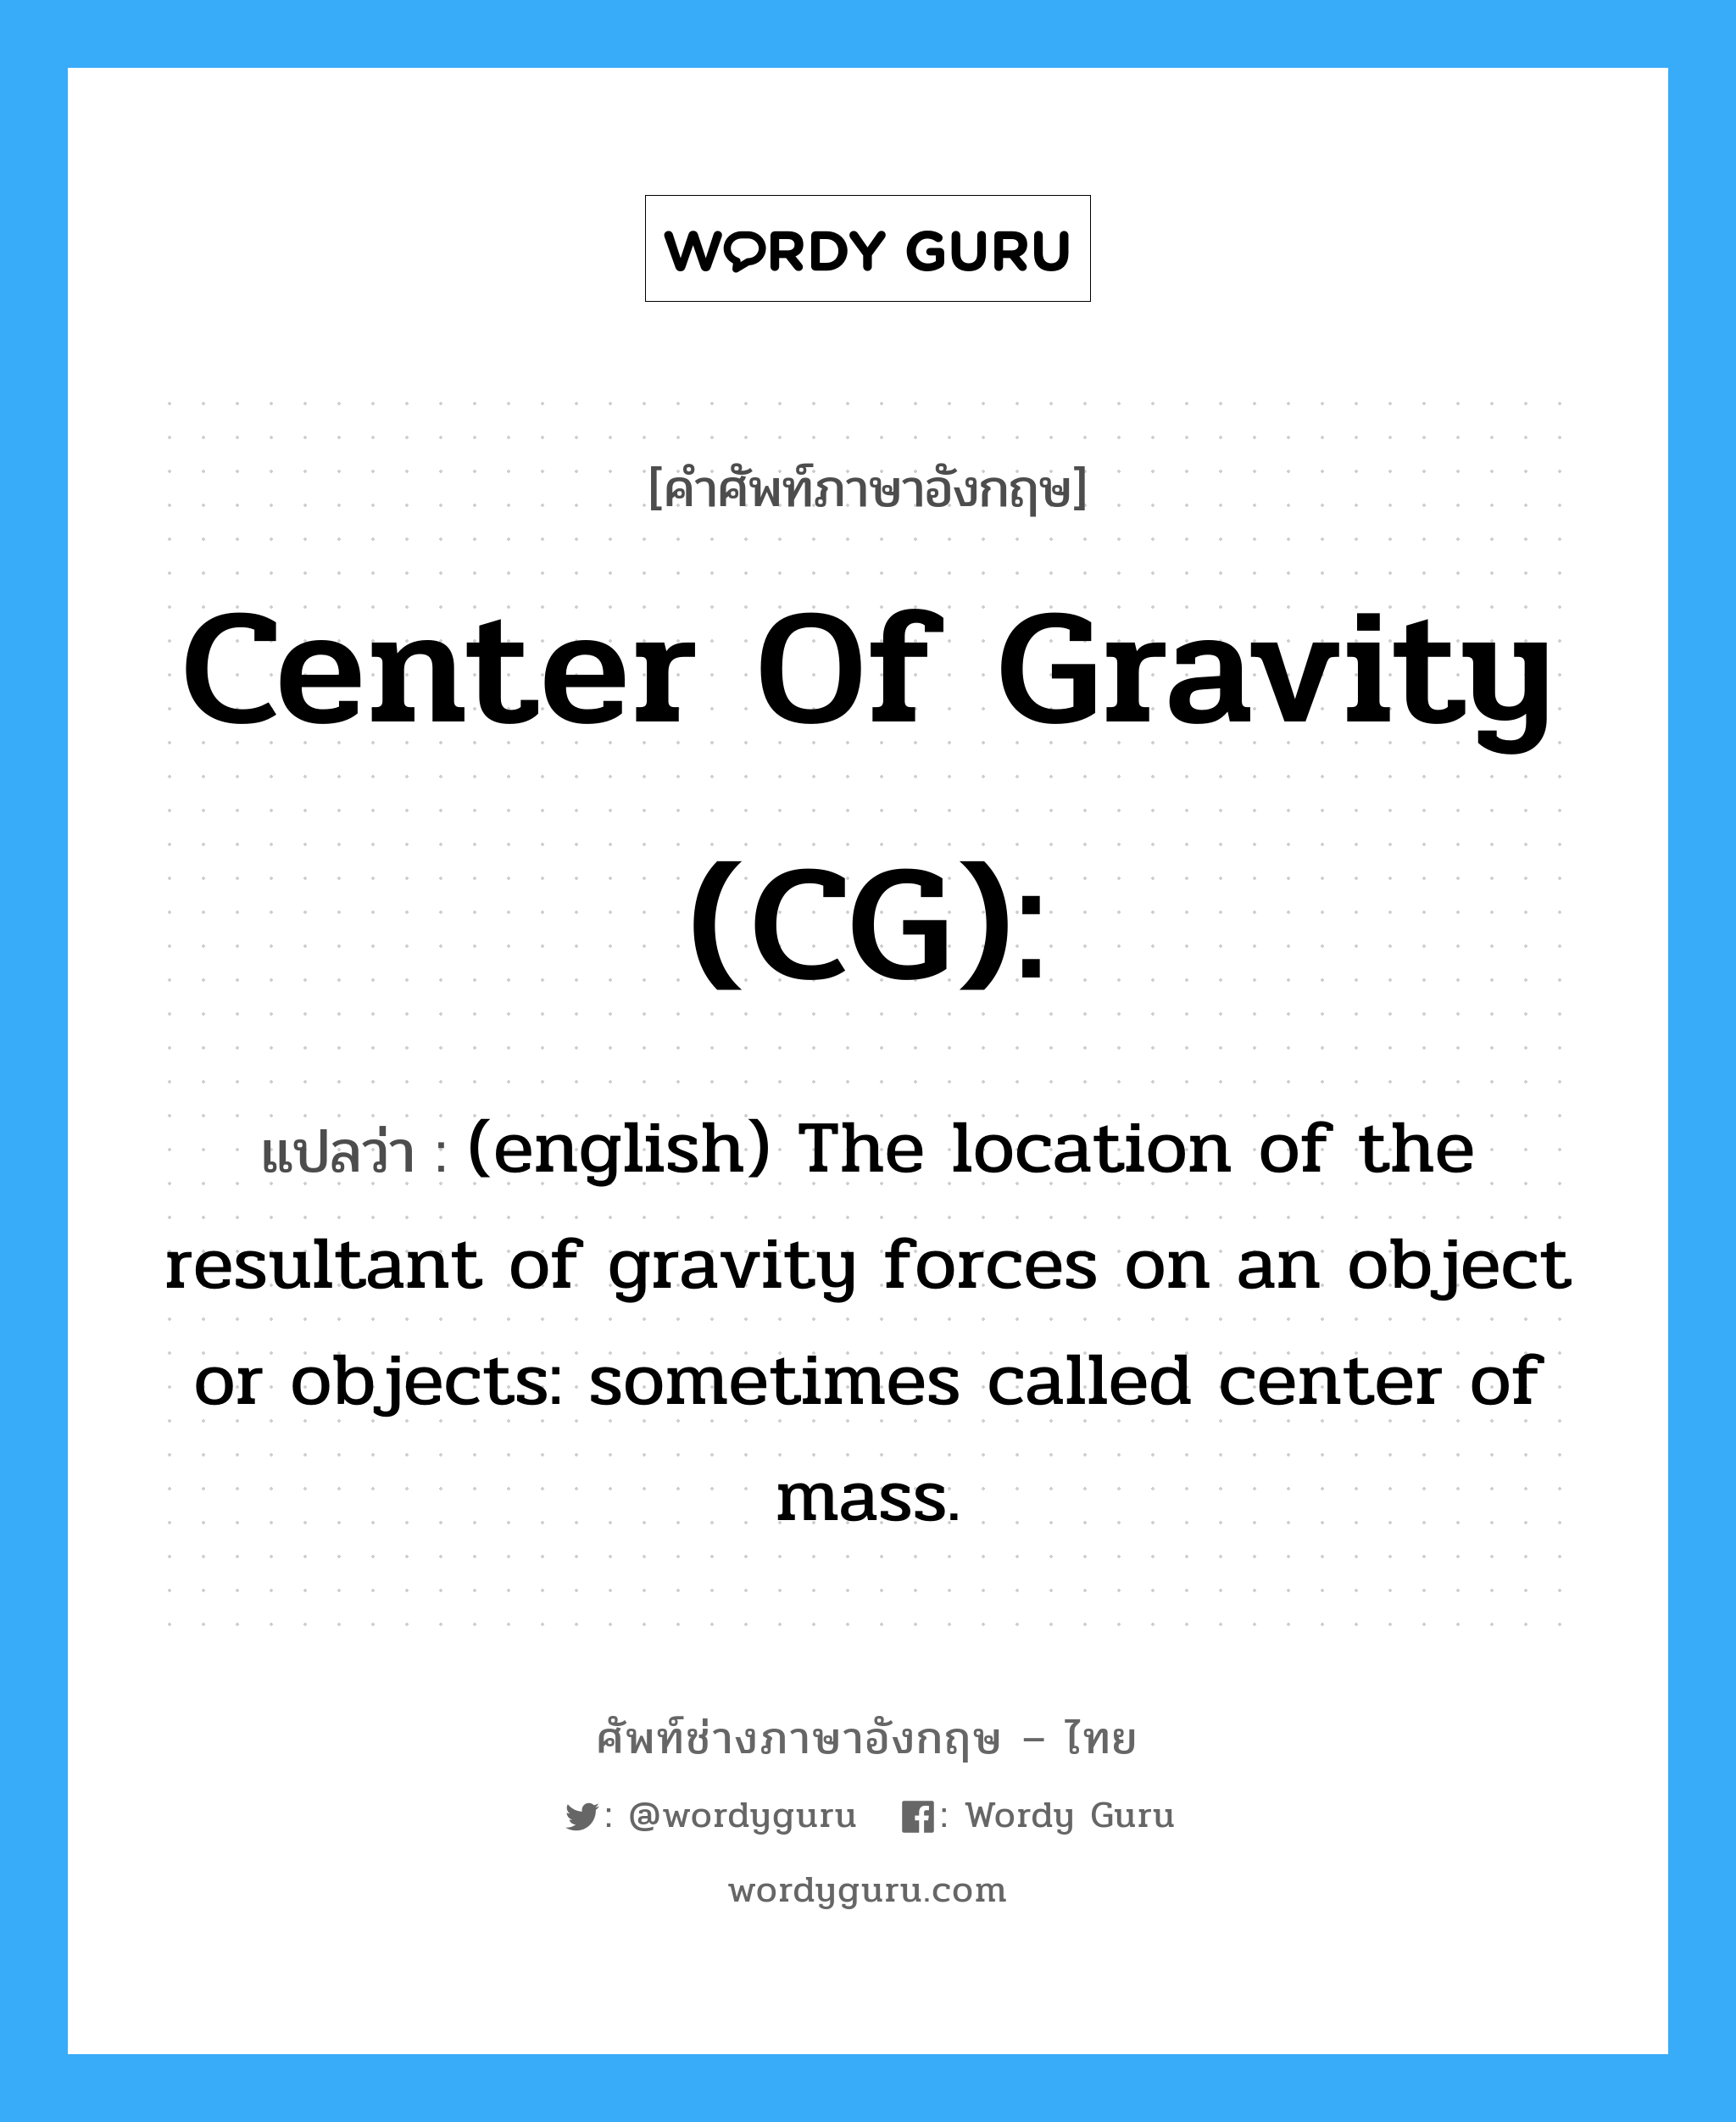 (english) The location of the resultant of gravity forces on an object or objects: sometimes called center of mass. ภาษาอังกฤษ?, คำศัพท์ช่างภาษาอังกฤษ - ไทย (english) The location of the resultant of gravity forces on an object or objects: sometimes called center of mass. คำศัพท์ภาษาอังกฤษ (english) The location of the resultant of gravity forces on an object or objects: sometimes called center of mass. แปลว่า Center of Gravity (CG):